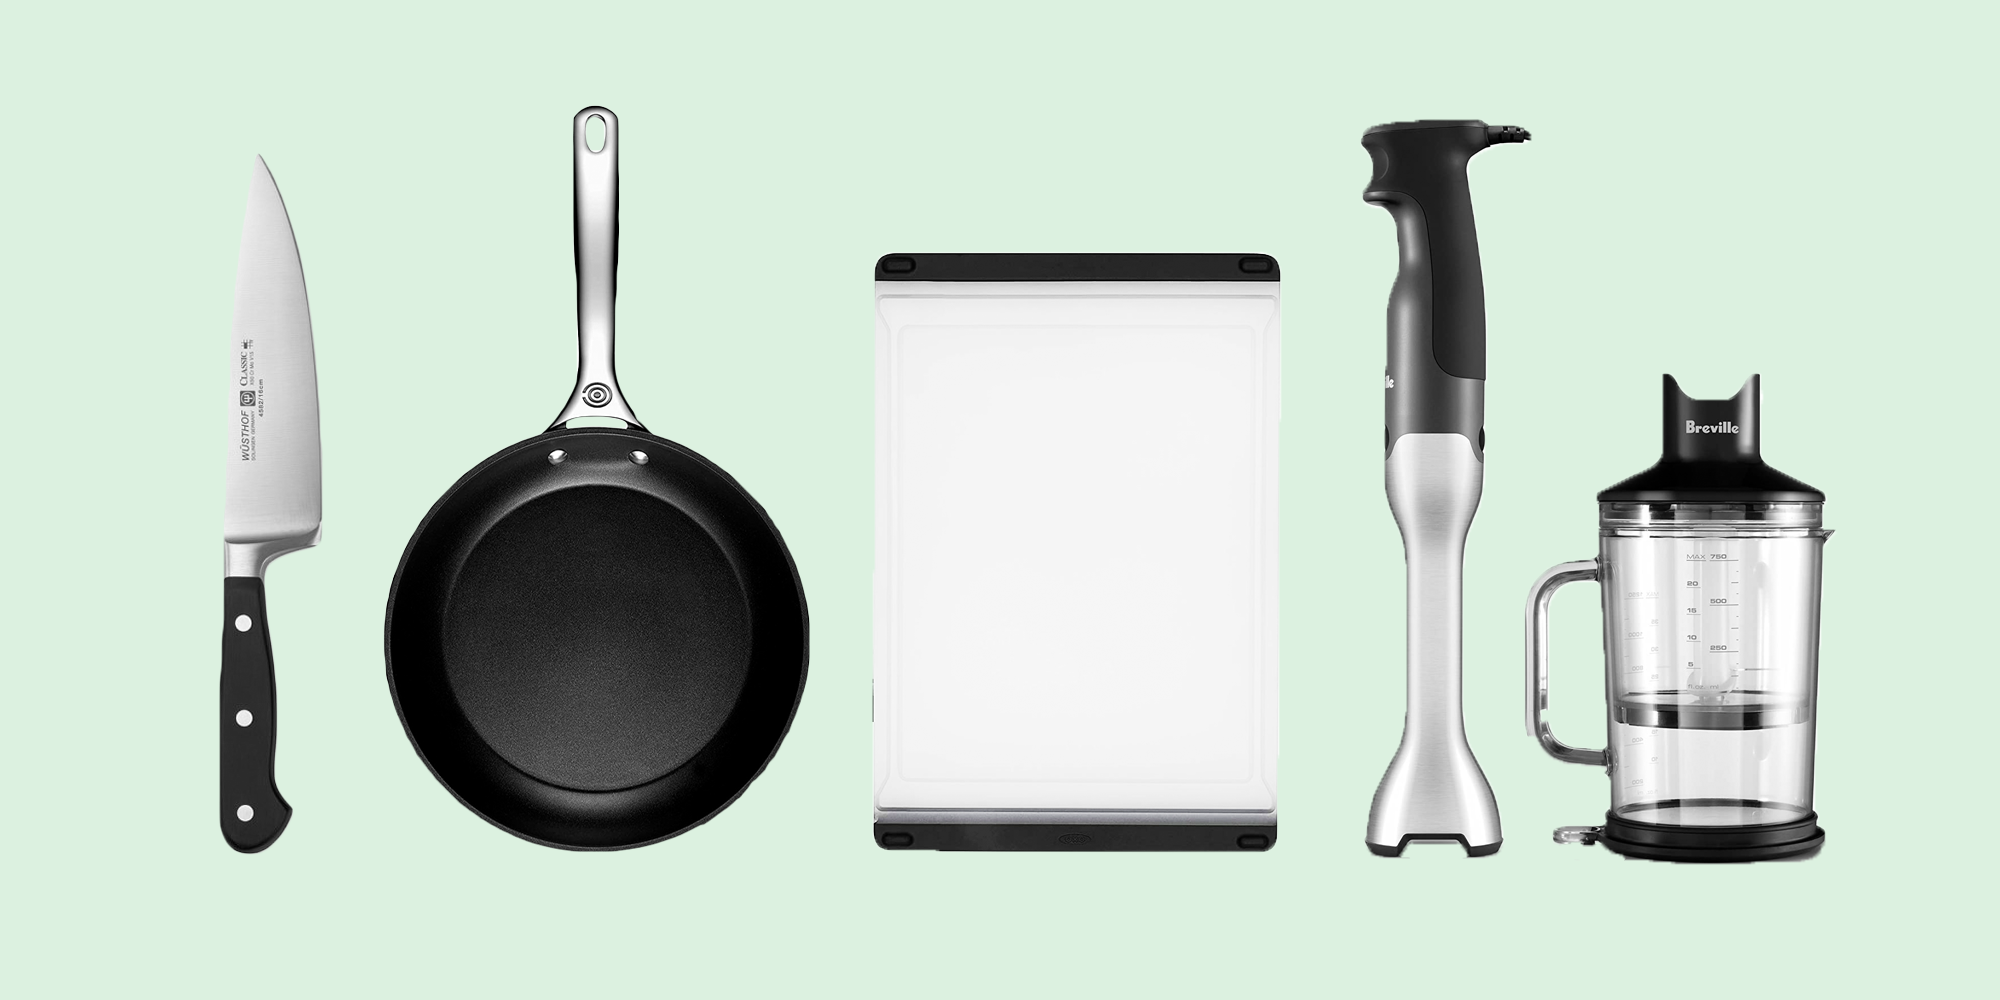 The Veggie Table: Favorite Kitchen Tools for a Vegetarian or Vegan